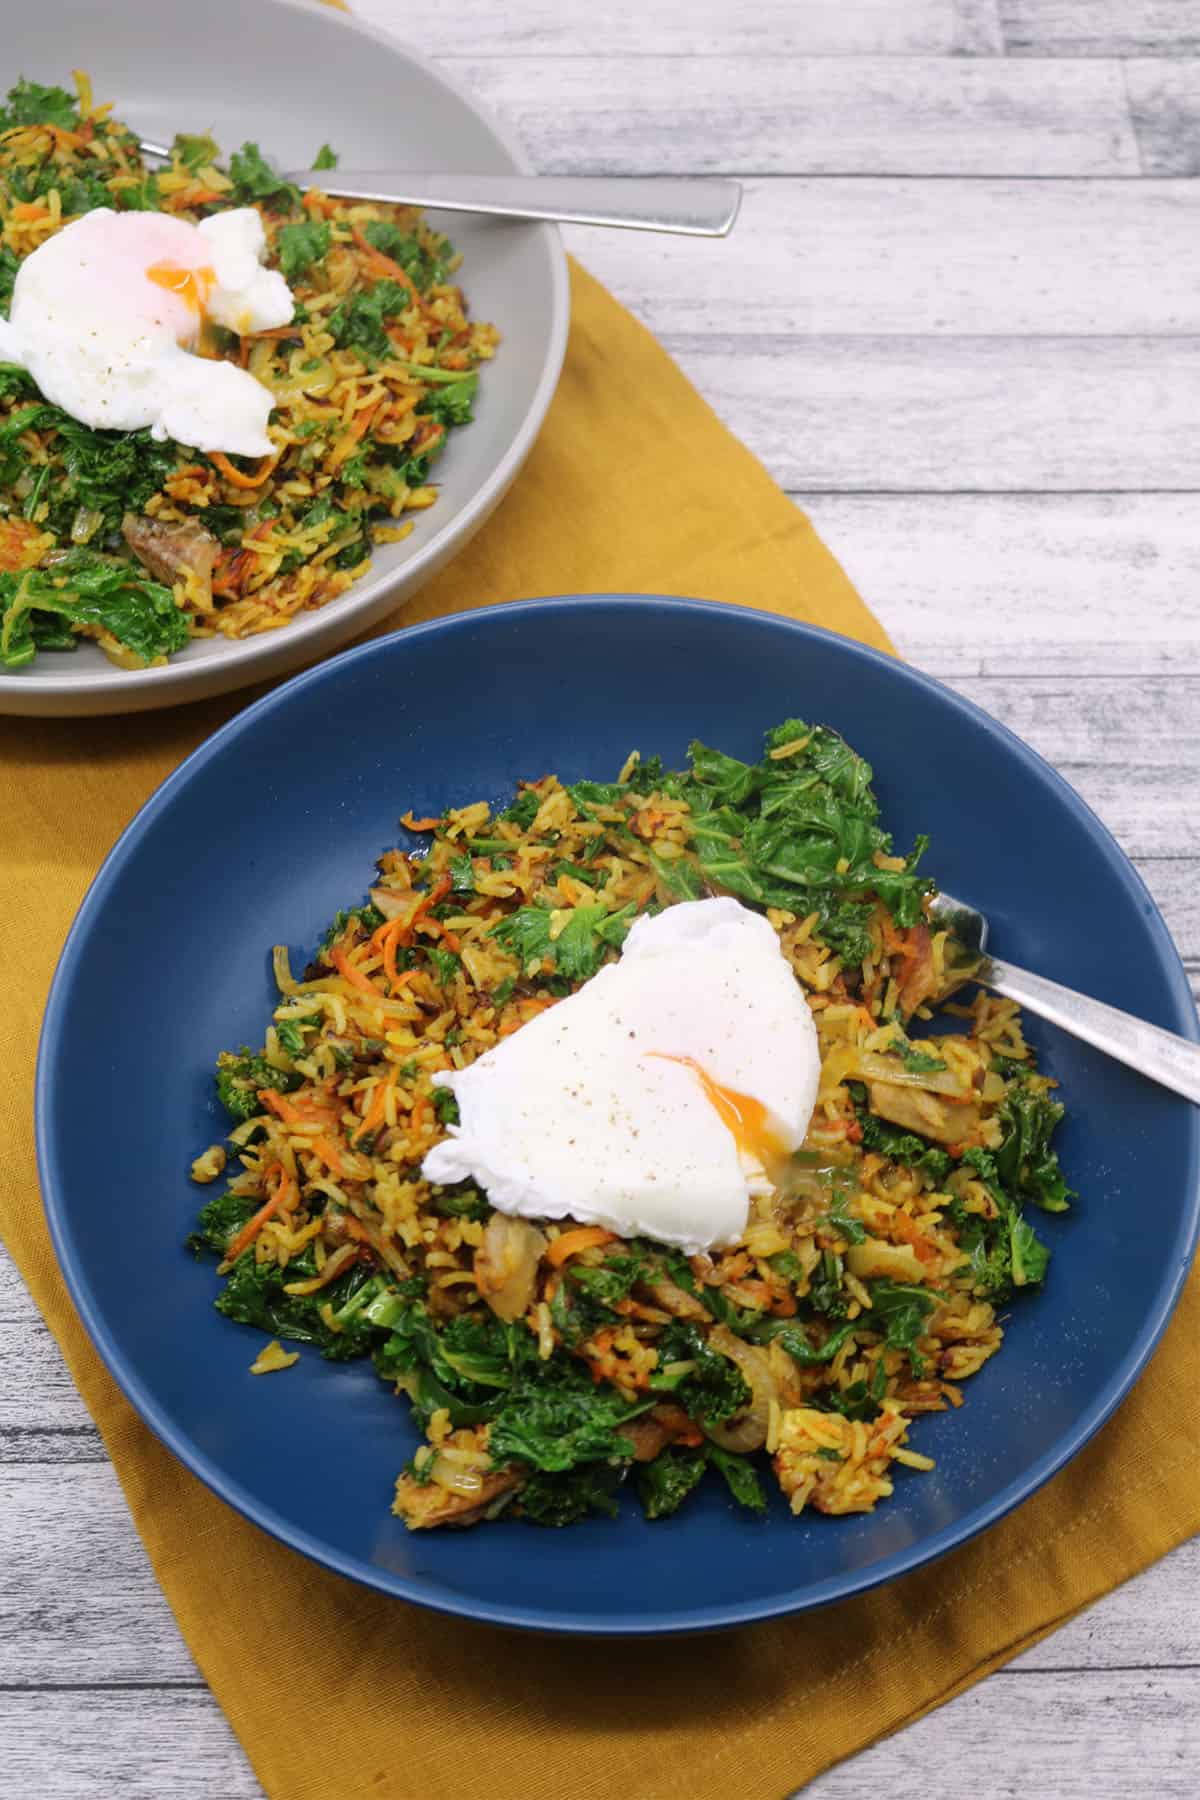 Spiced kipper fried rice topped with poached egg in blue and grey bowls sitting on yellow napkin with fork